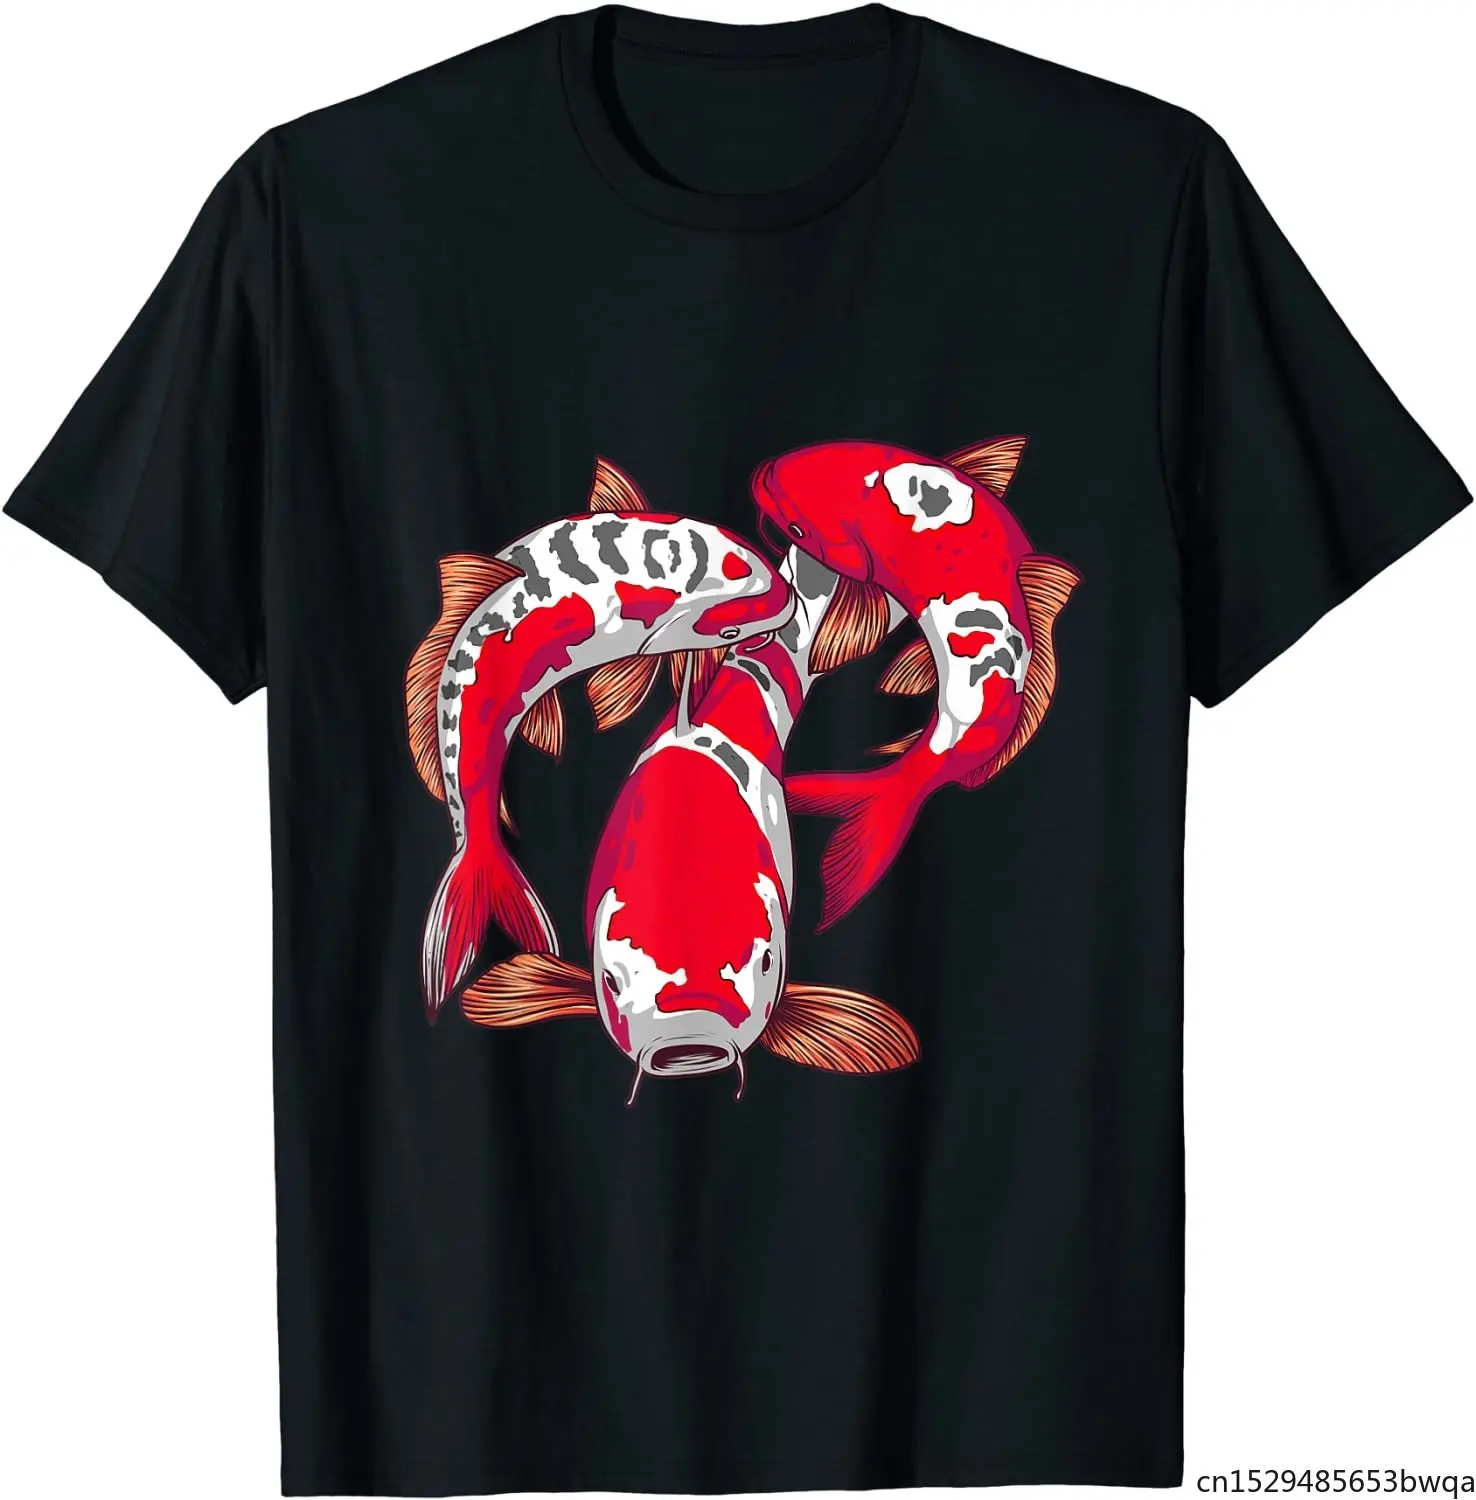 Funny Koi Fish Gift for Men Cool Japanese Fish Lover T-shirts Fashion Casual Cotton Tees Tops O-Neck Short Sleeve Men T Shirt